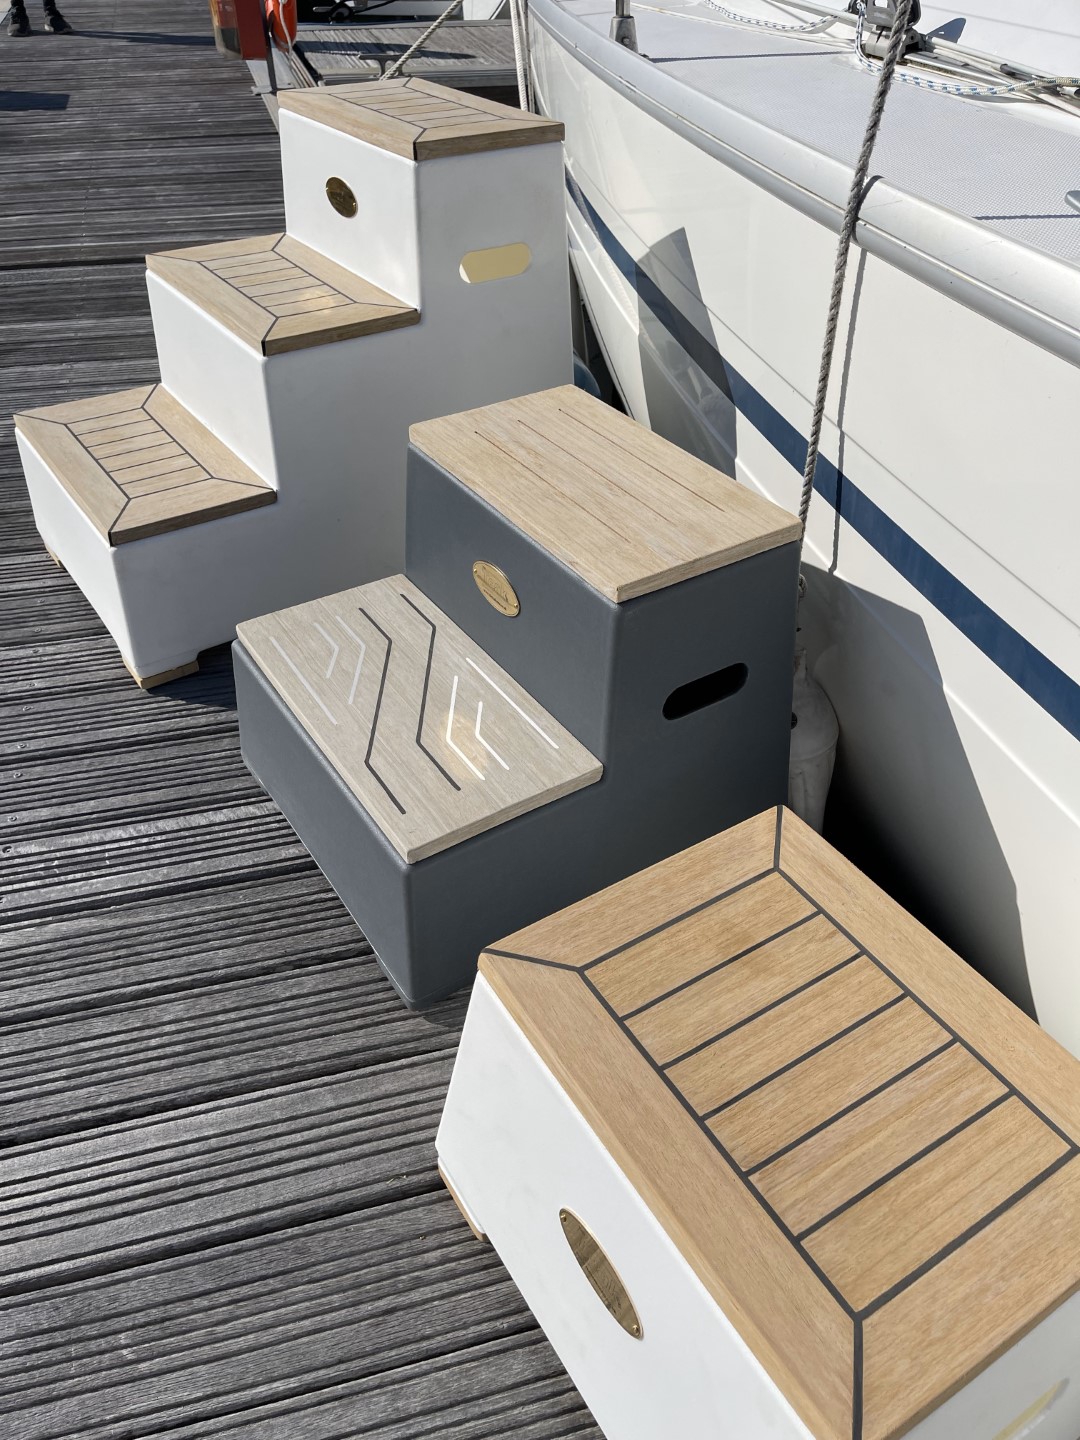 DIY Jon Boat Casting Deck: How to Build a Spacious and Functional